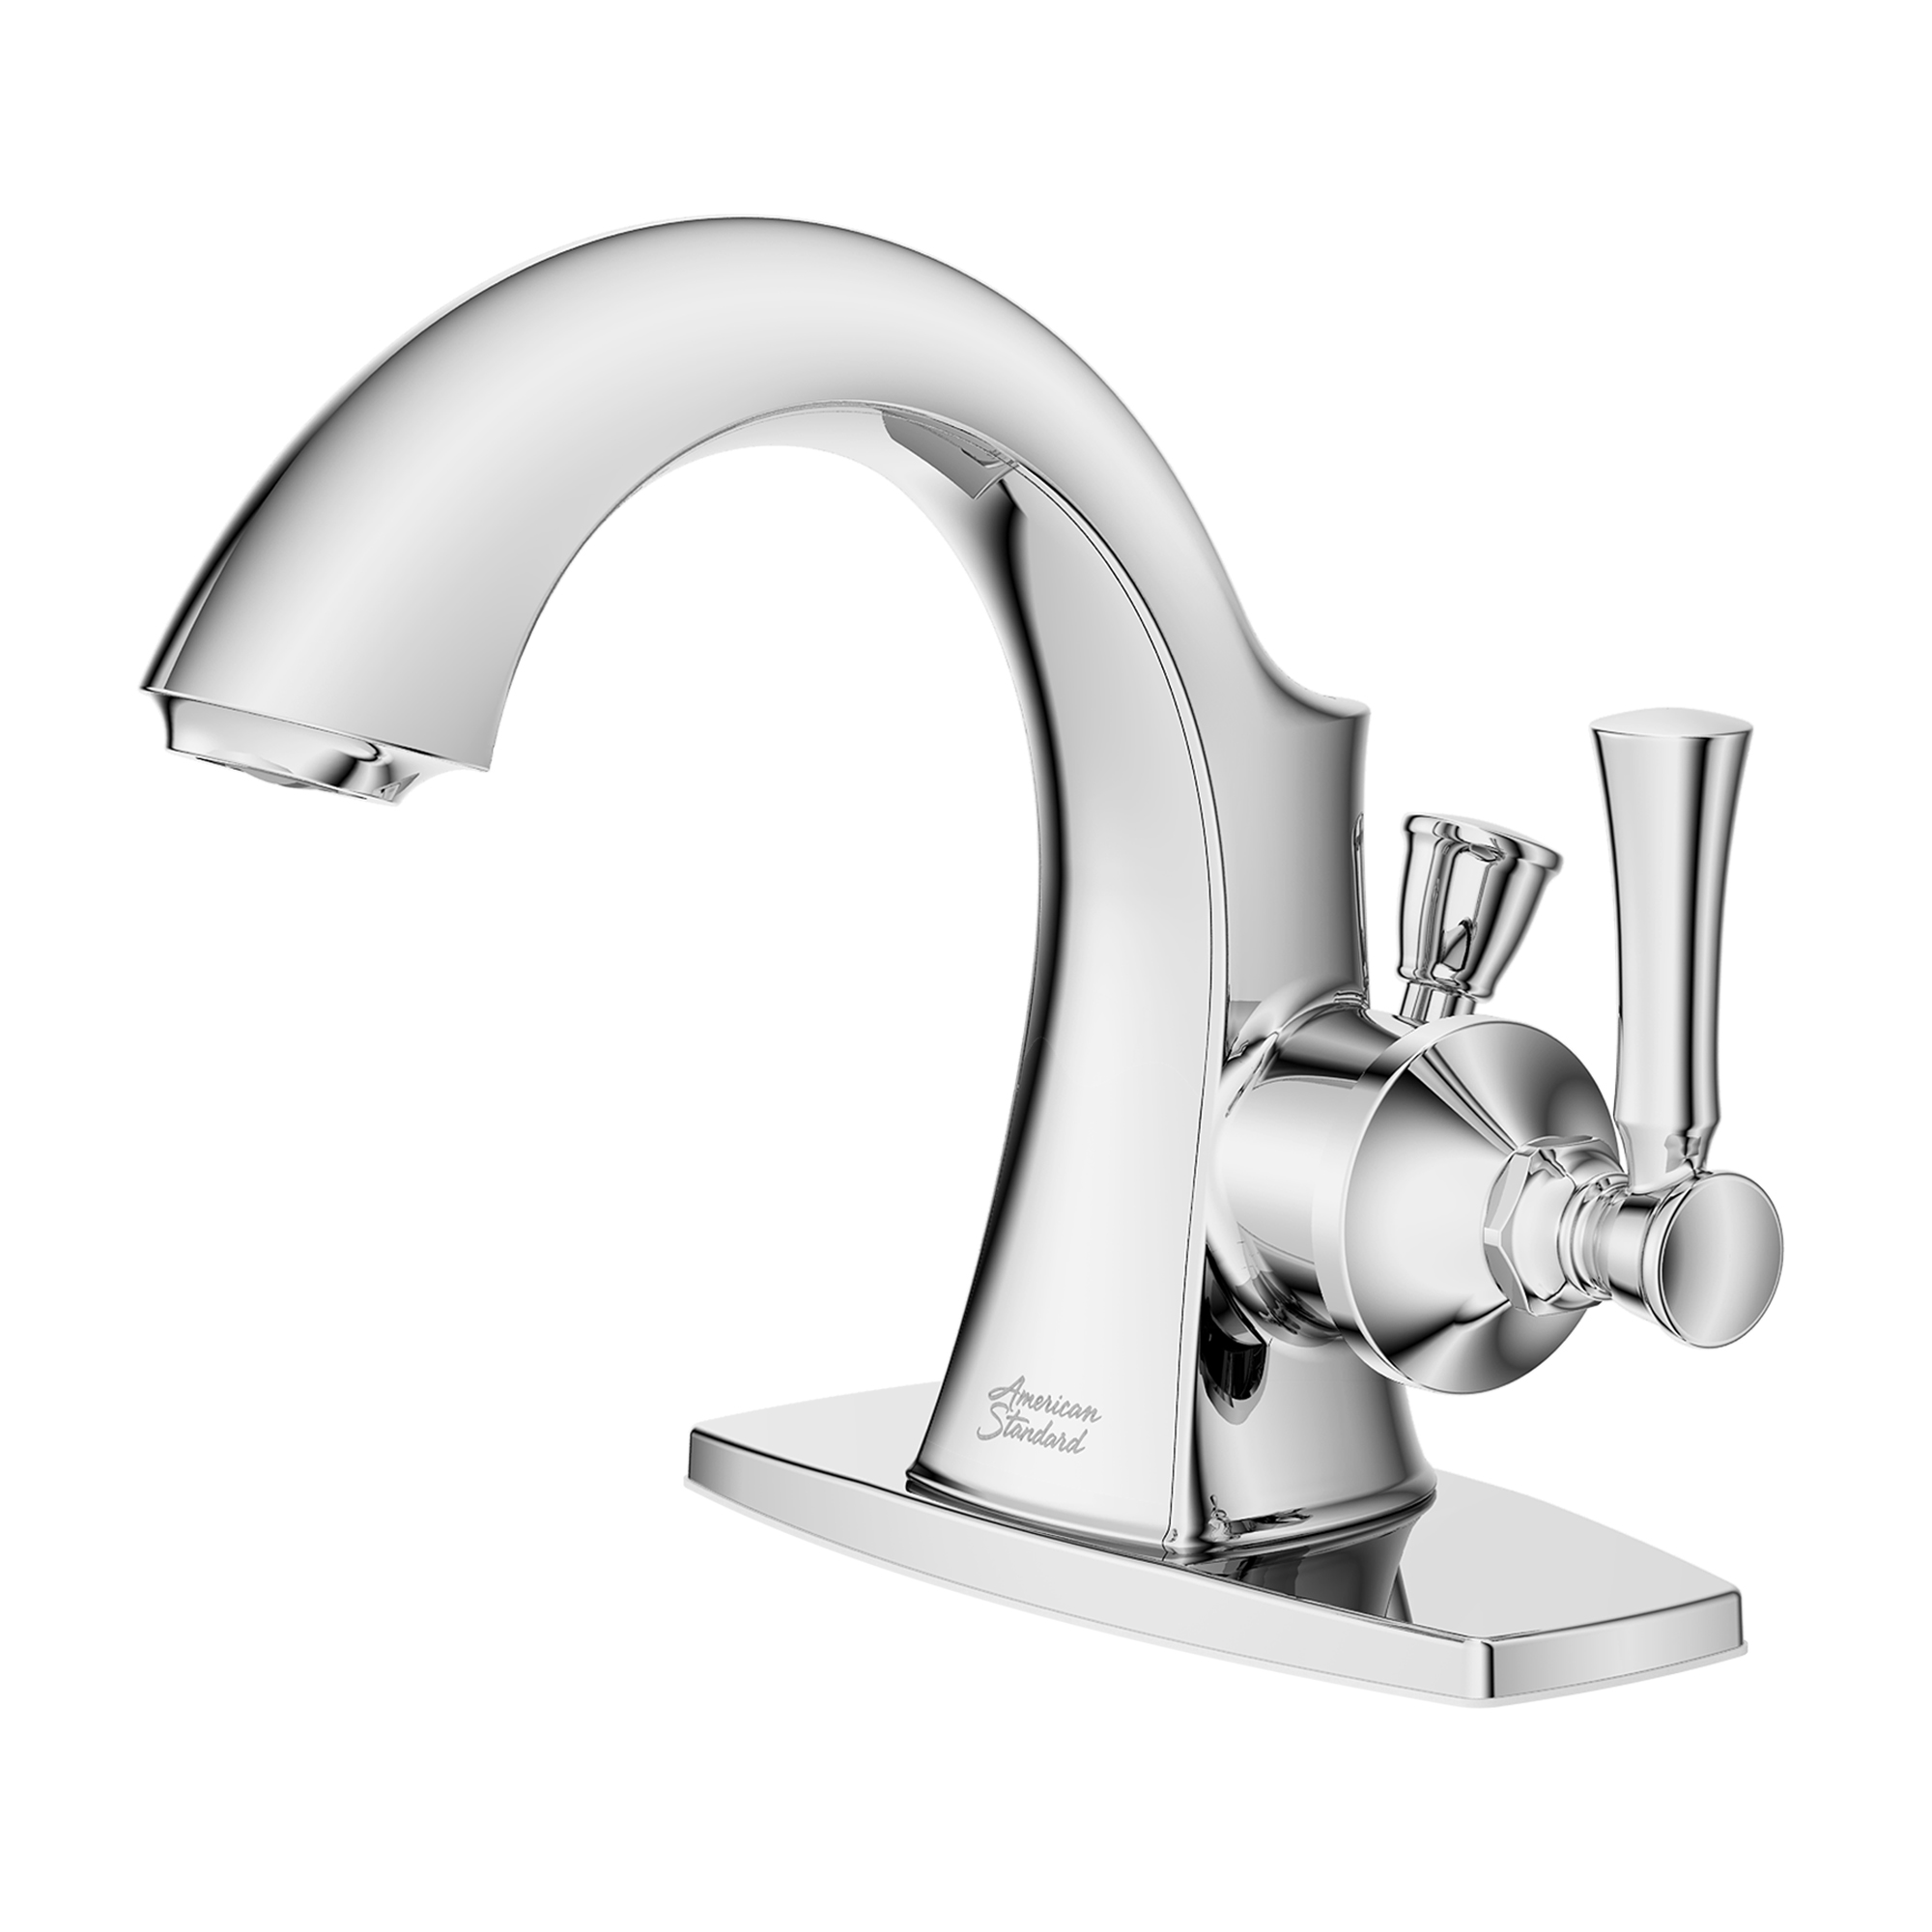 Chancellor 4-In. Centerset Single-Handle  Bathroom Faucet 1.2 GPM with Lever Handle